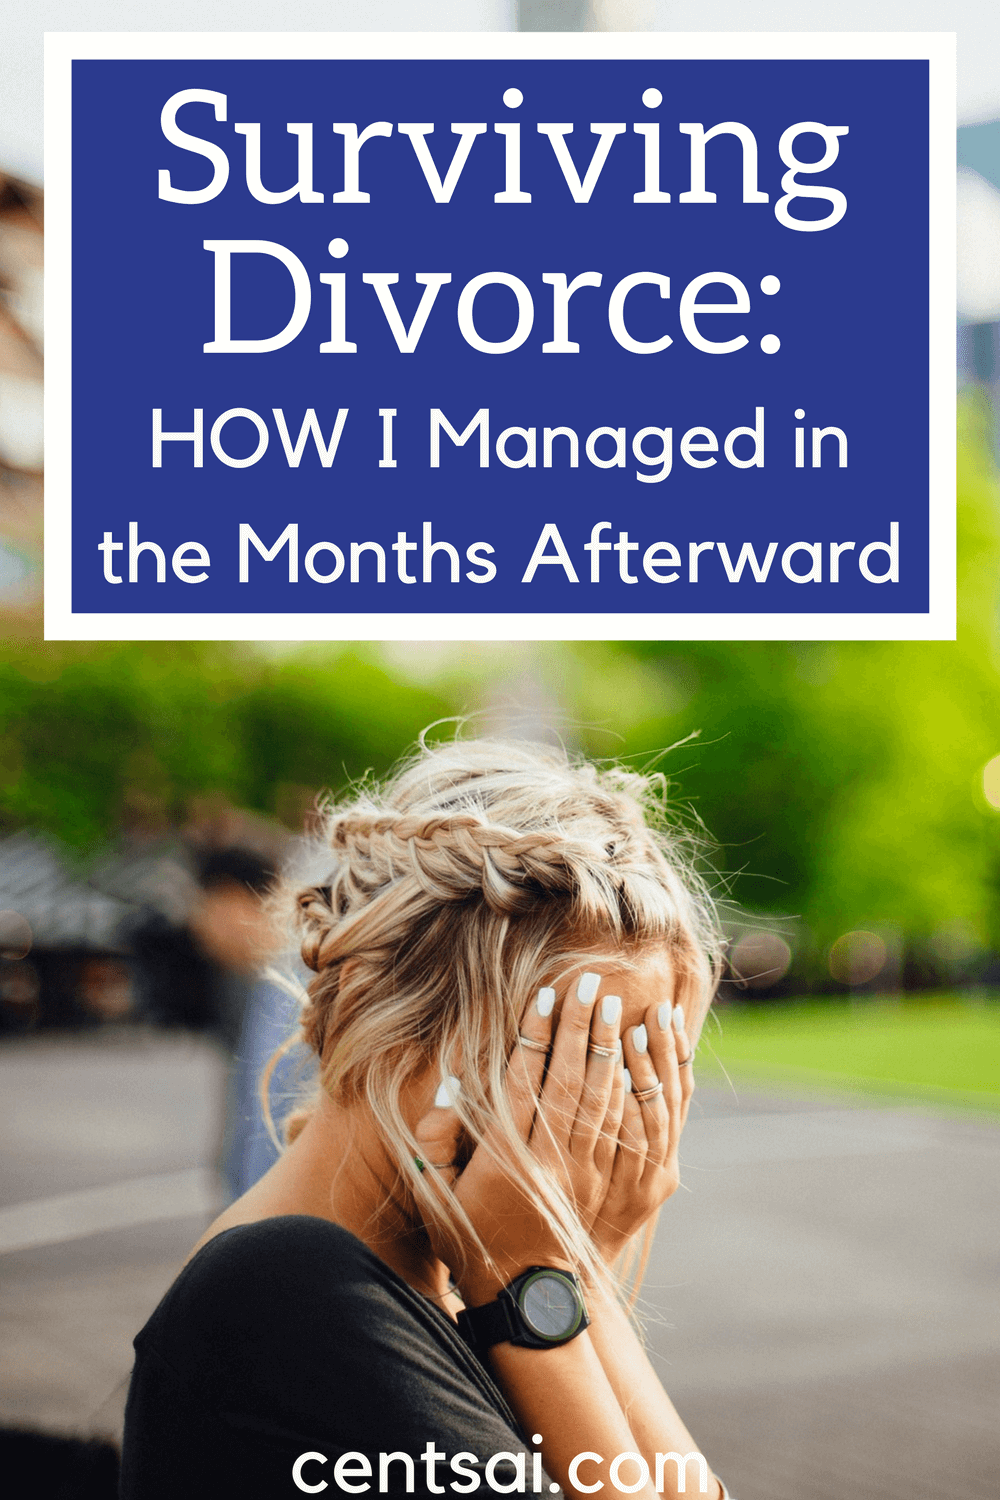 Surviving Divorce How I Managed in the Months Afterward